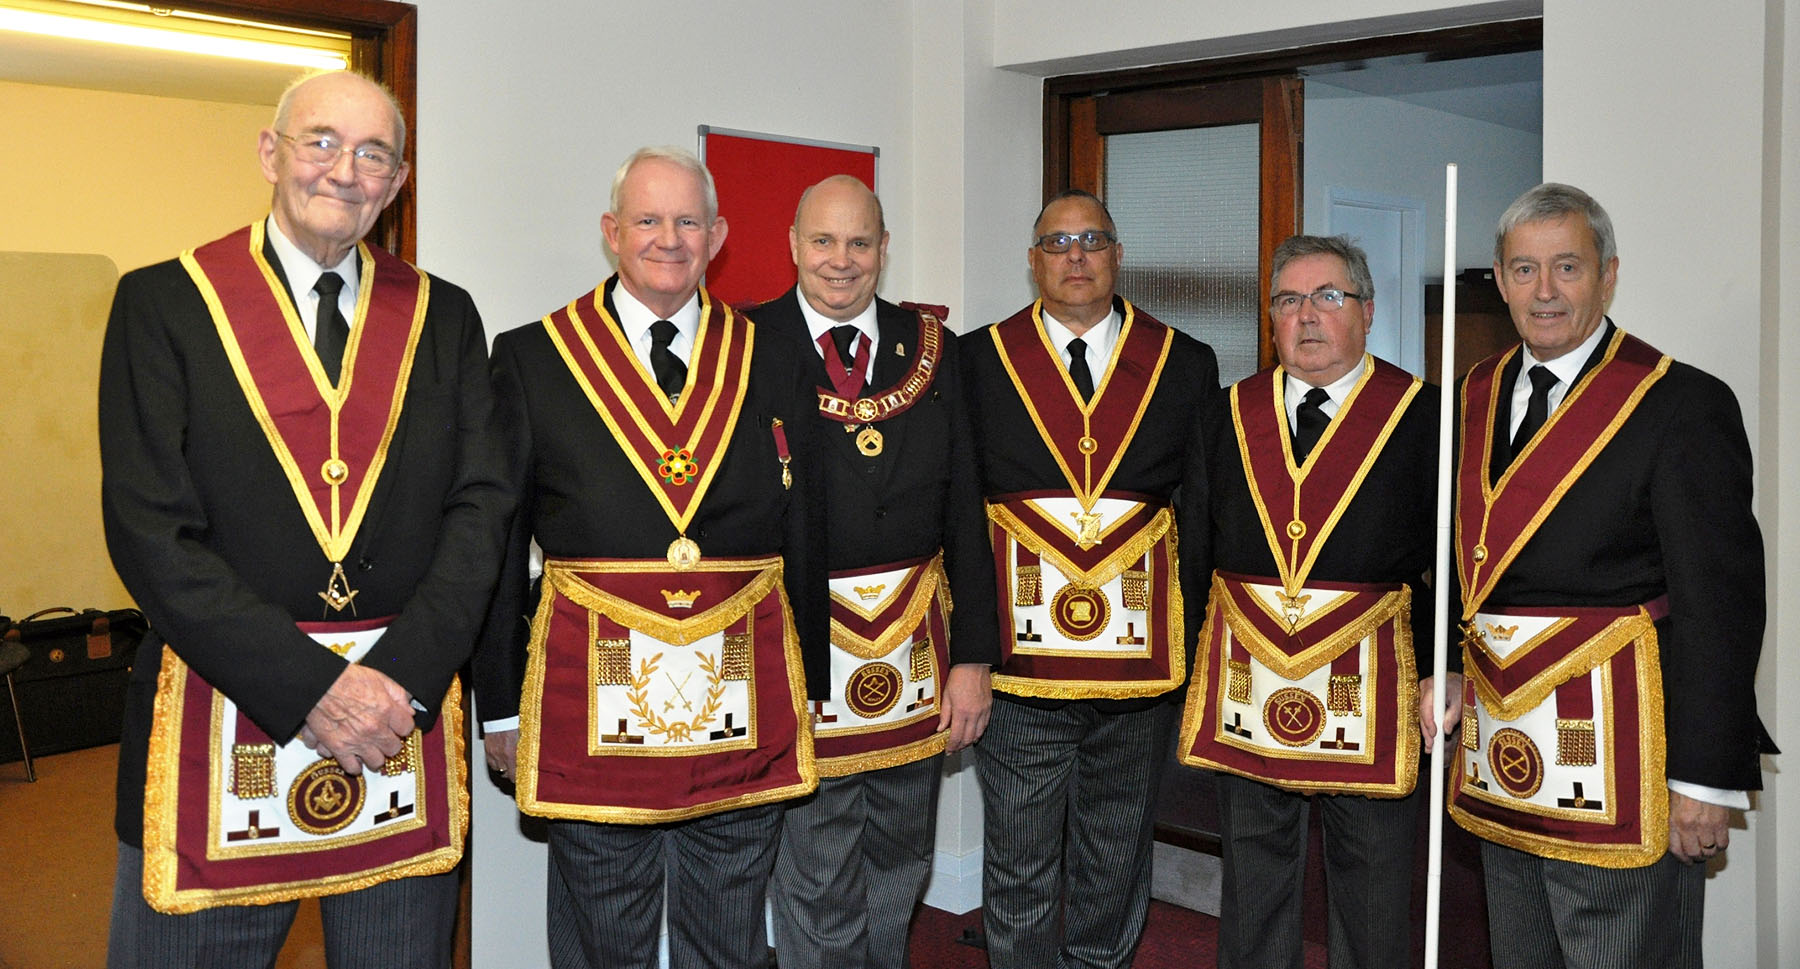 Official Visit by the Deputy Provincial Grand Master to the Court of Sion Abbey